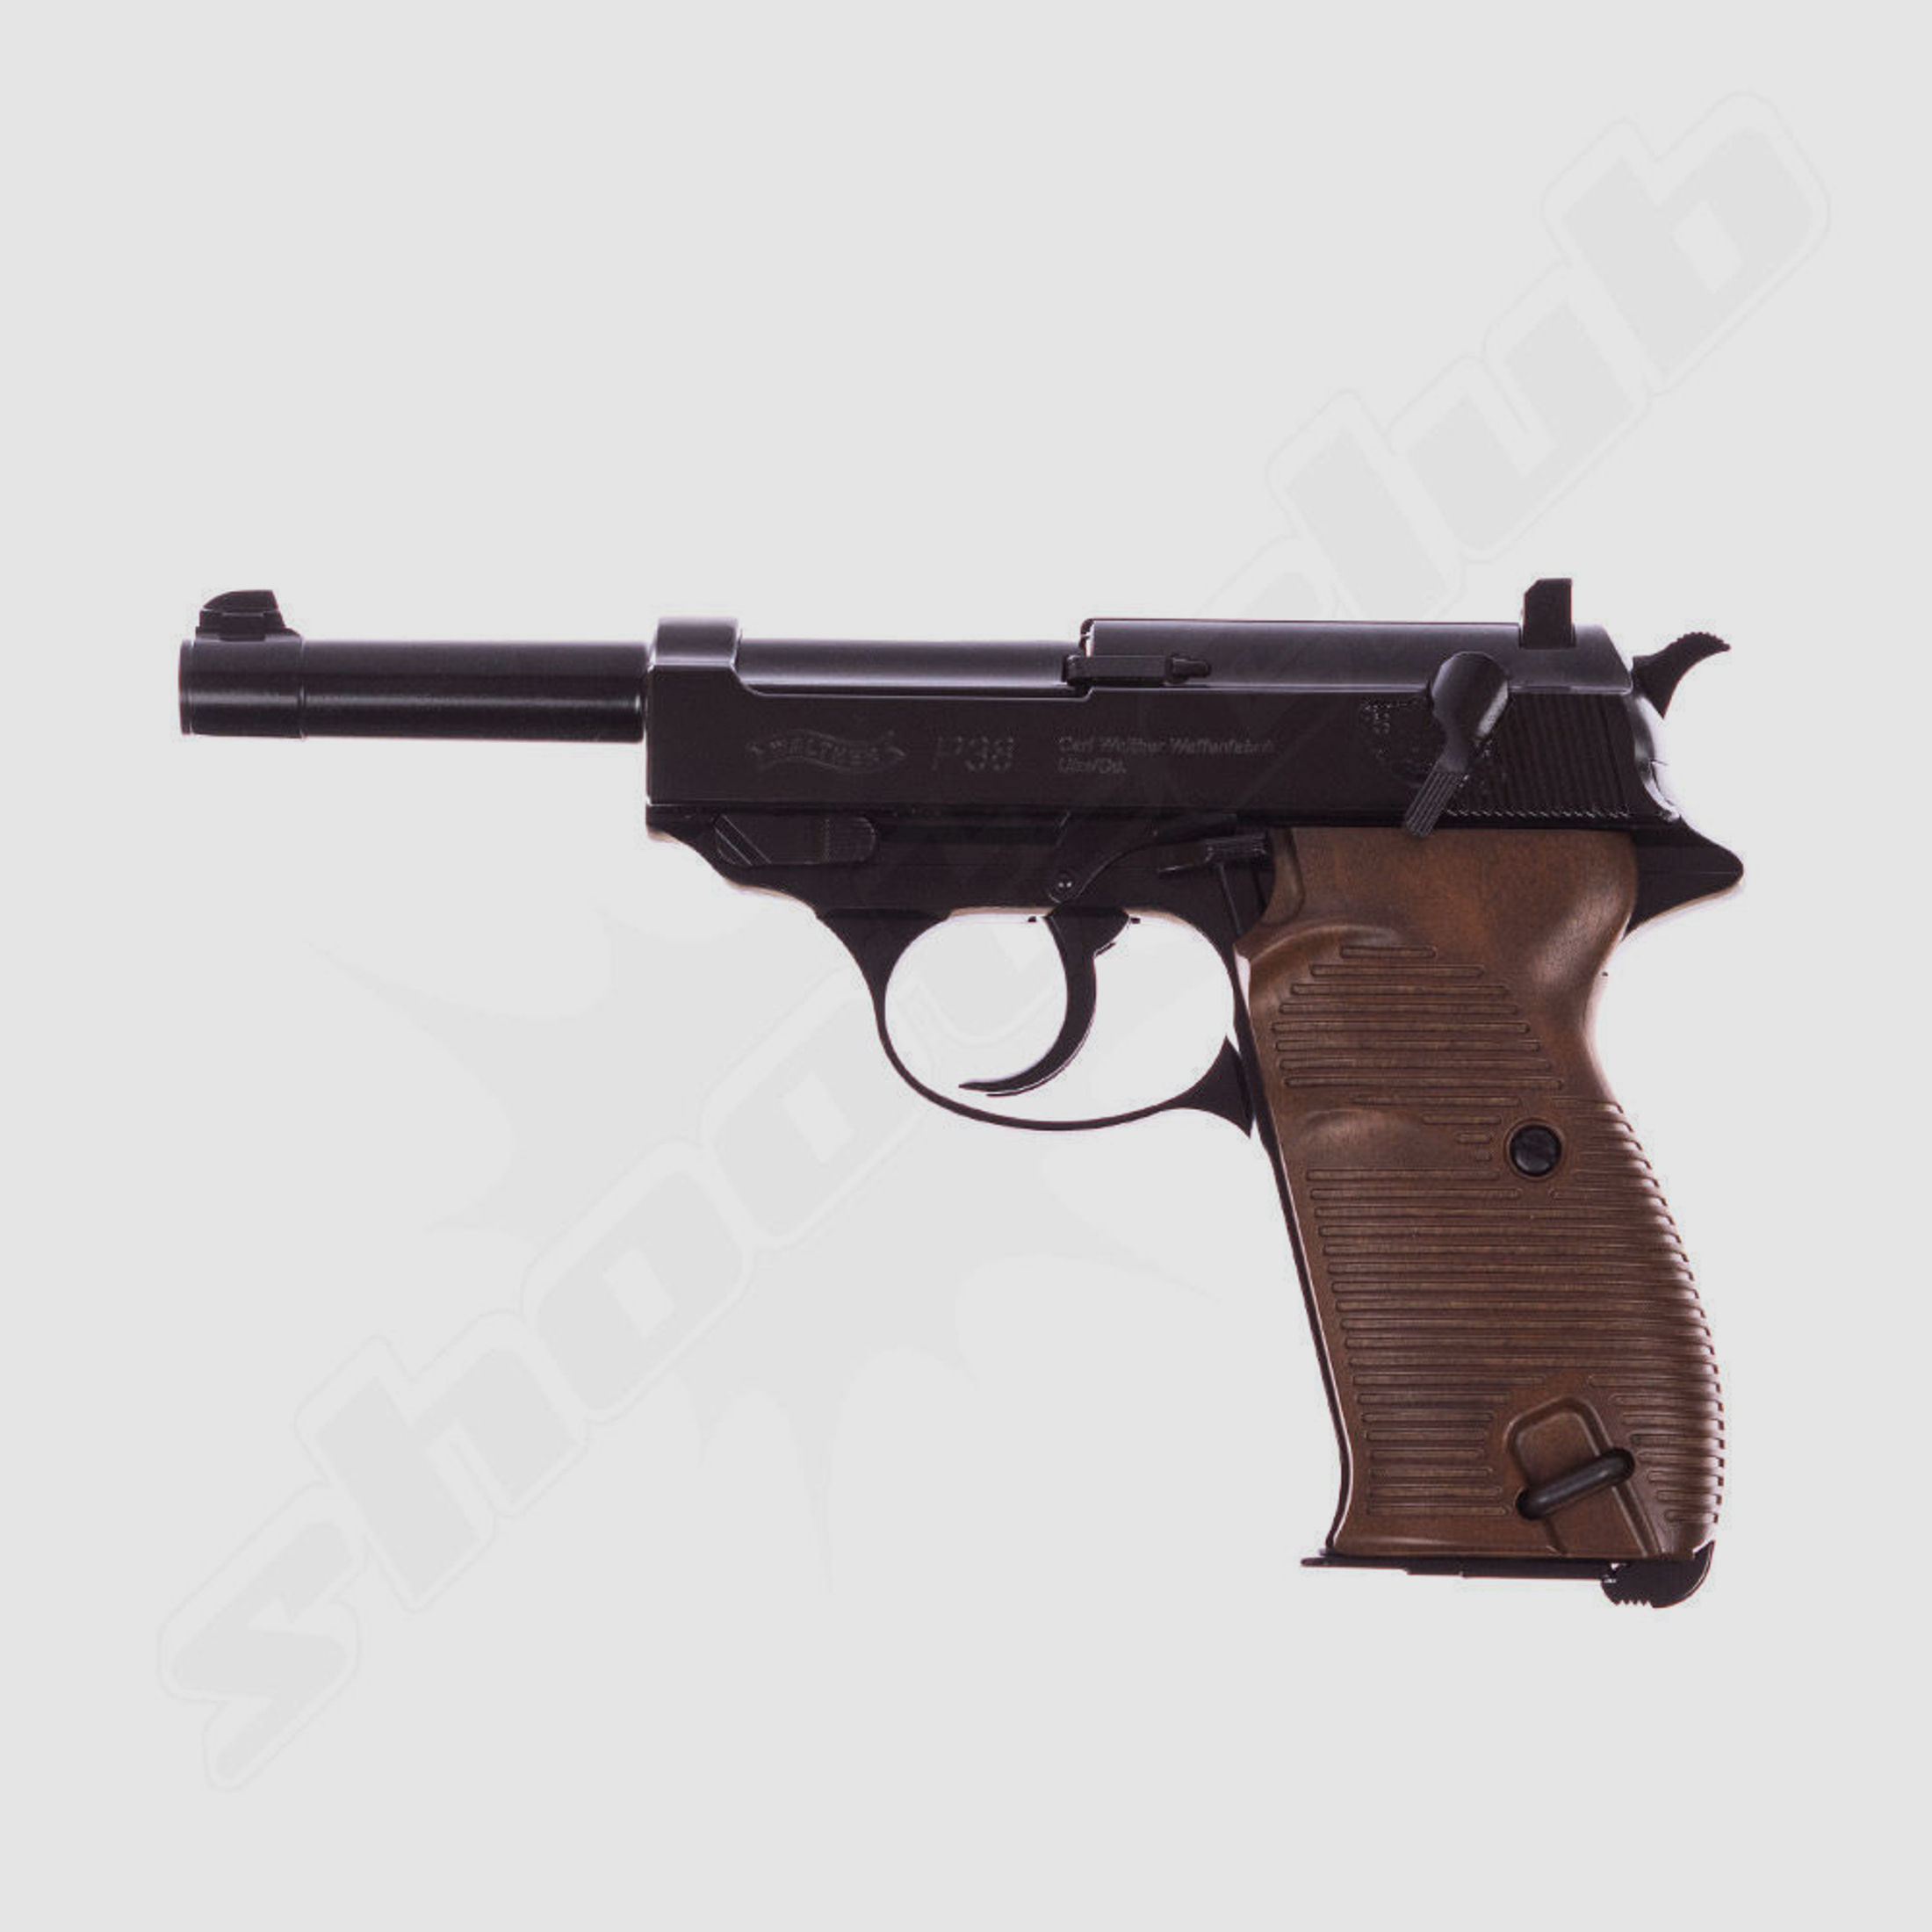 Walther P38 CO2 Pistole mit Blowback - 4,5mm Stahl BBs